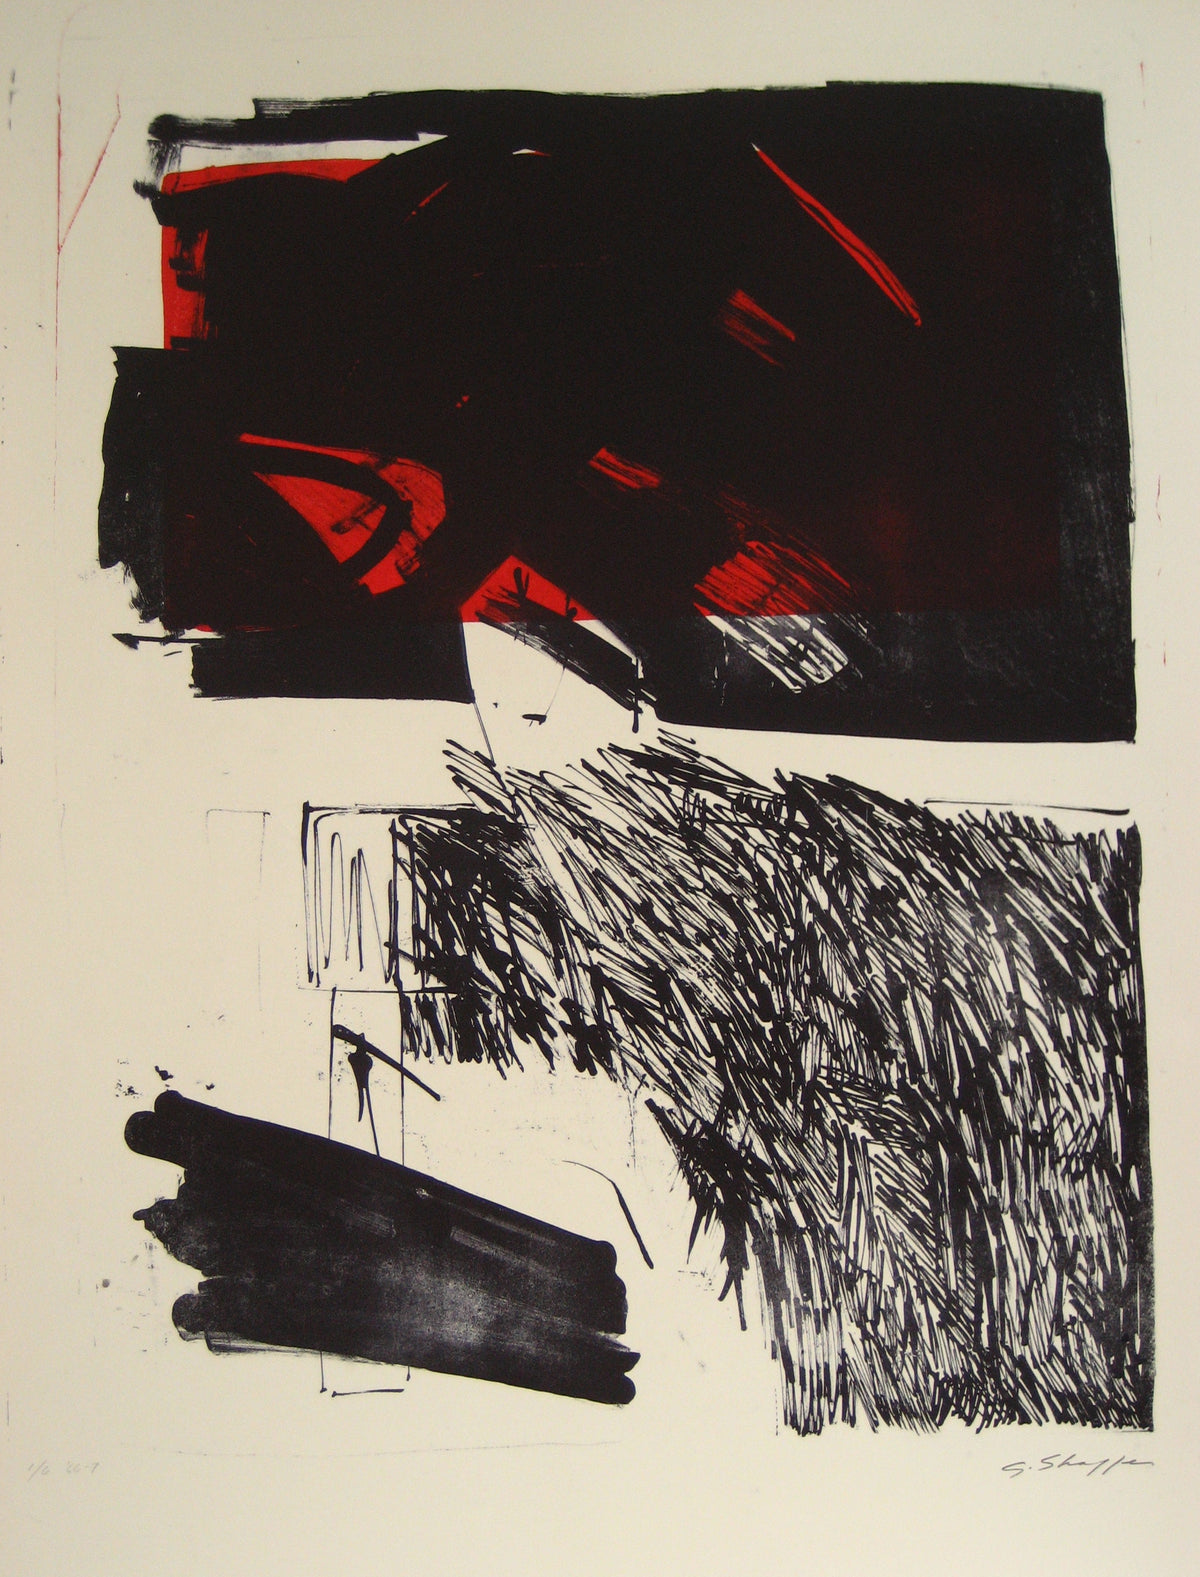 Dark Abstract Expressionist &lt;br&gt;1967 Stone Lithograph &lt;br&gt;&lt;br&gt;#6394